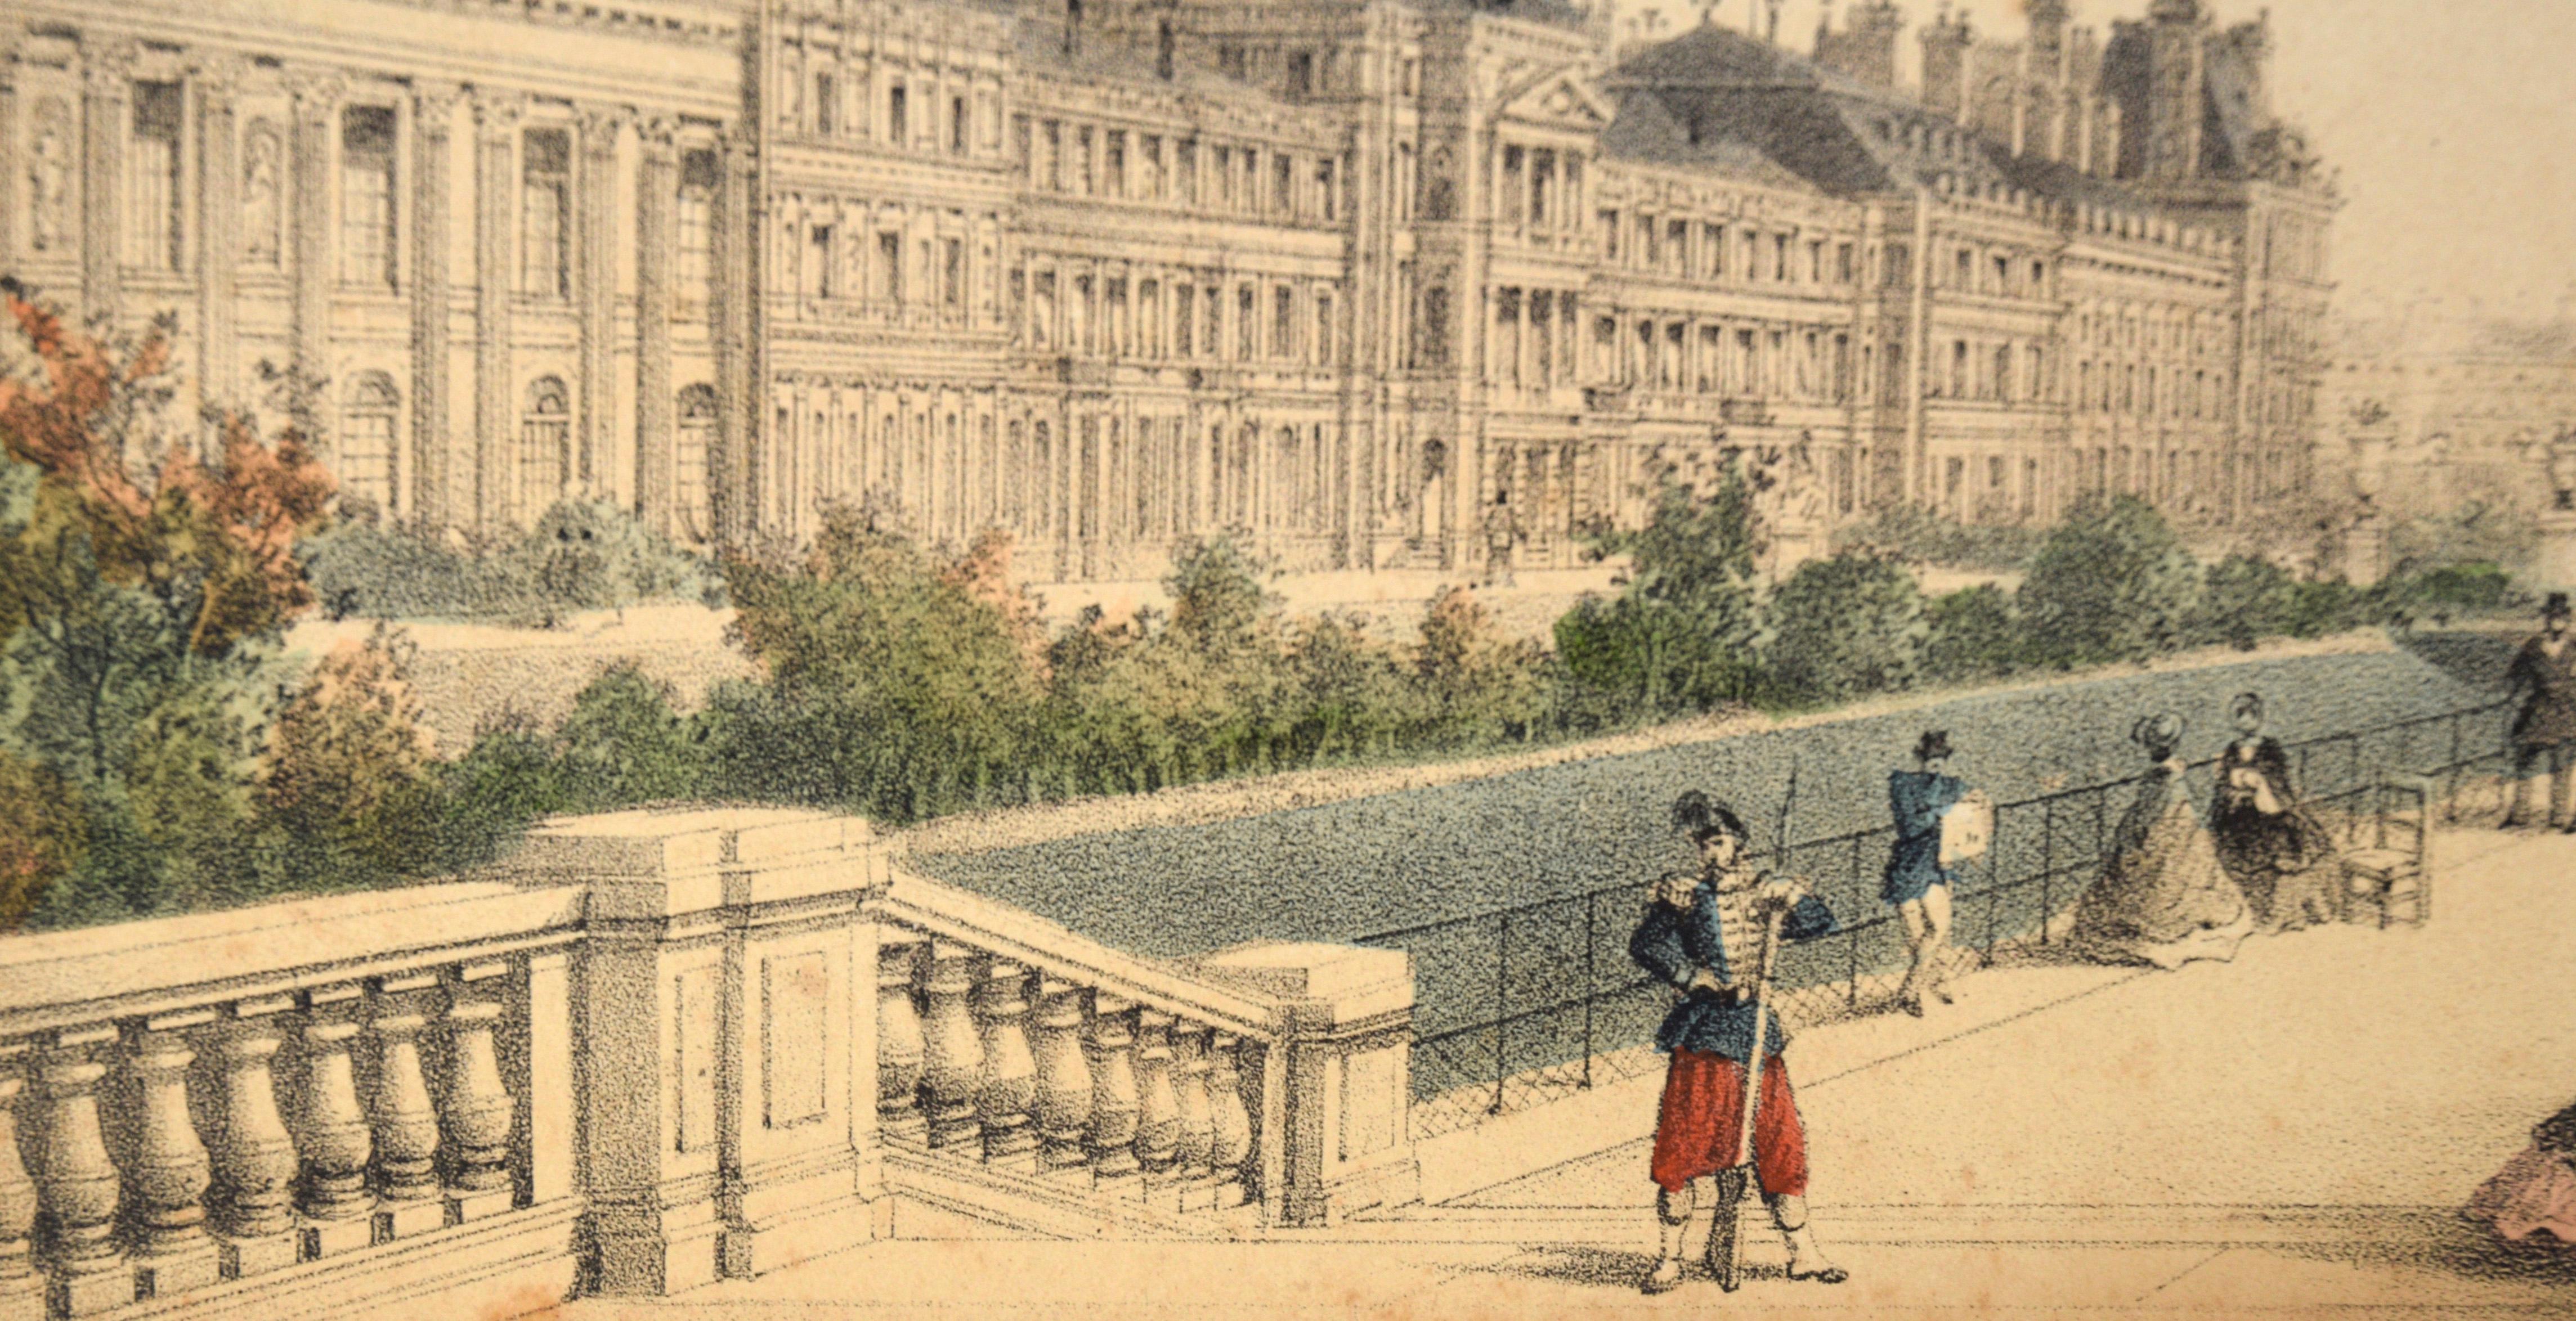 Les Tuileries, Paris - Hand Colored Lithograph

Delicate hand-colored lithograph of Tuileries Palace in Paris, France printed by Rose-Joseph Lemercier (French, 1803 - 1887). Published, Paris 1843 to 1867 by Hautecoeur Freres (Eugène and Alfred